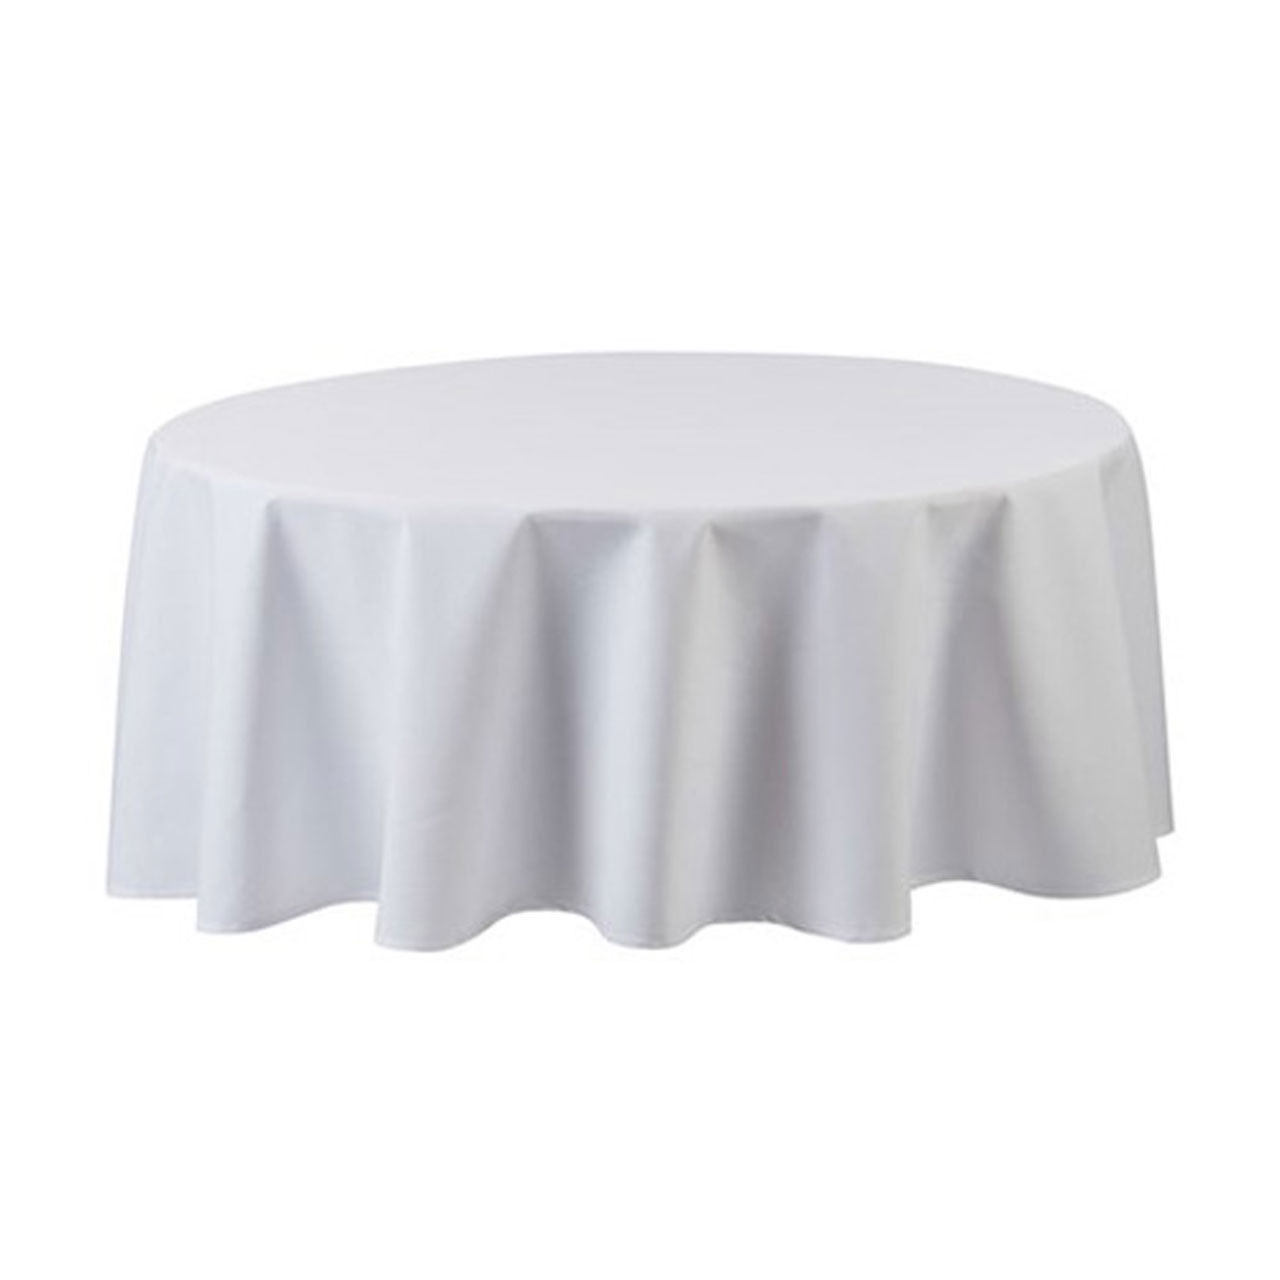 What is the weight of the 120 round tablecloth per sq yard?